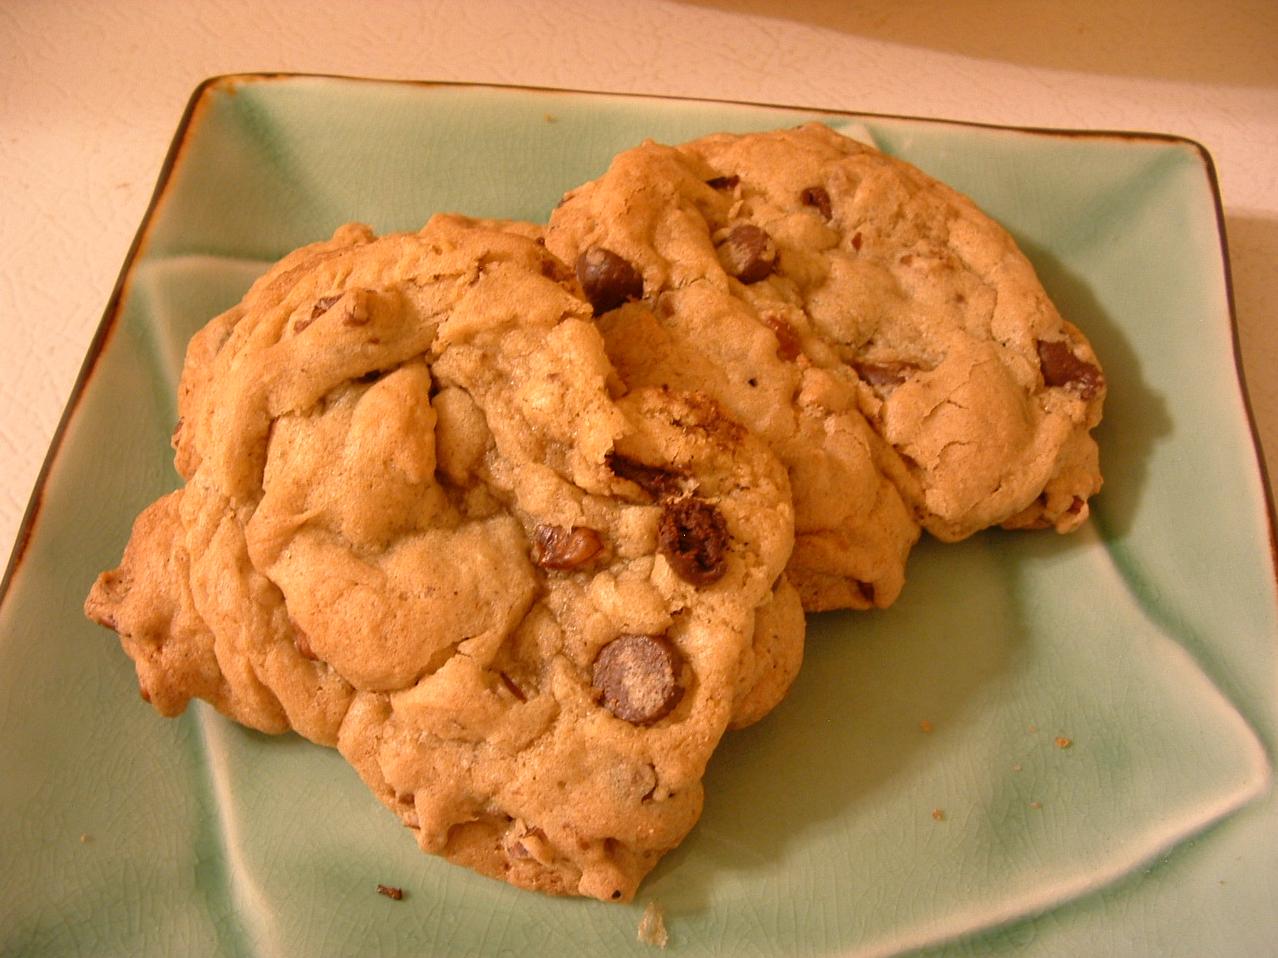 Gluten Free Toll House Chocolate Chip Mimicry